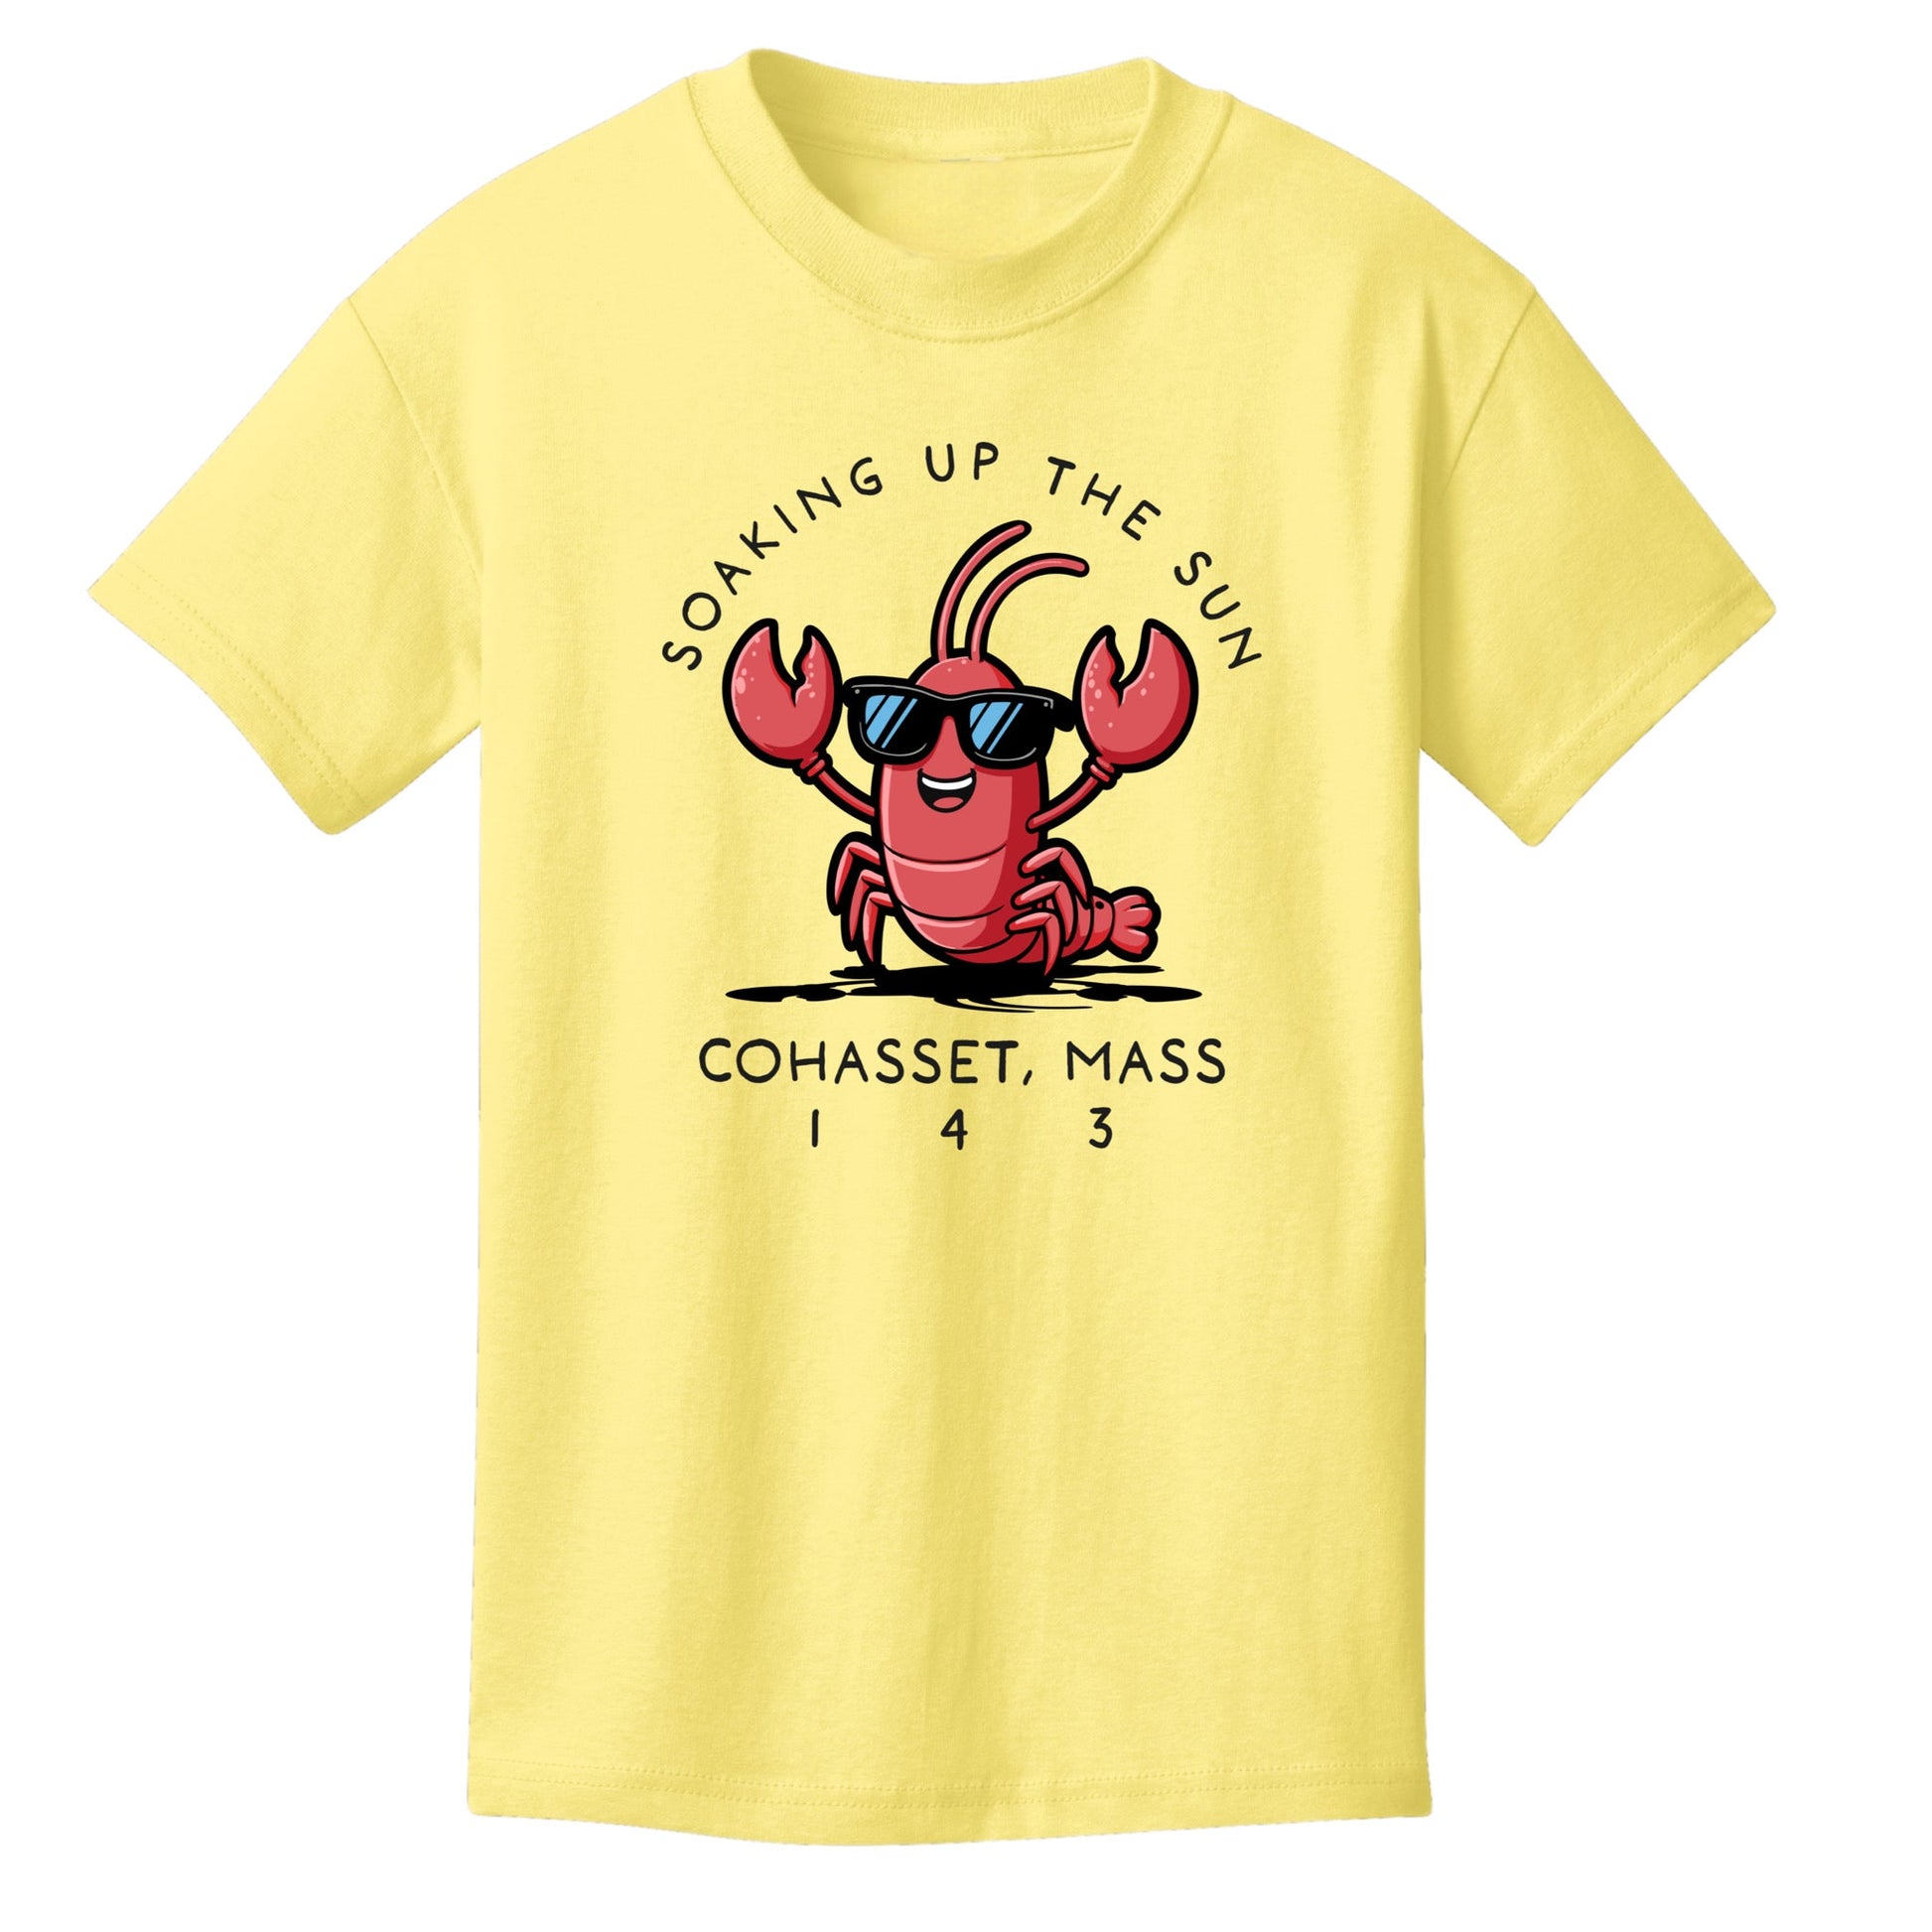 Personalize Free Beach Lobster, Cohasset, Kids Cotton Tees from Baby Squid Ink 